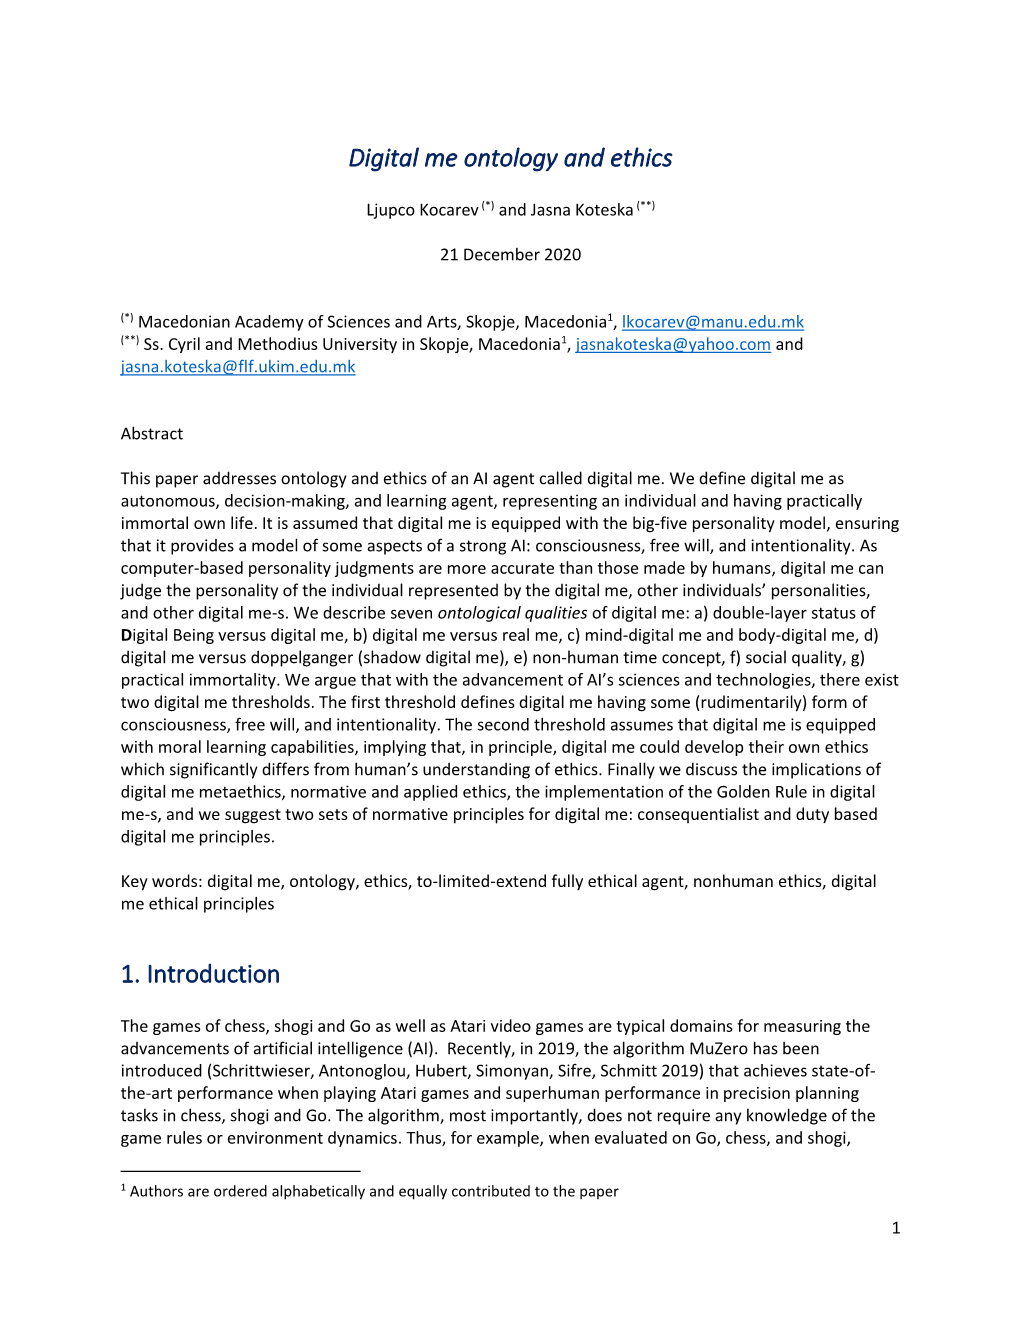 Digital Me Ontology and Ethics 1. Introduction